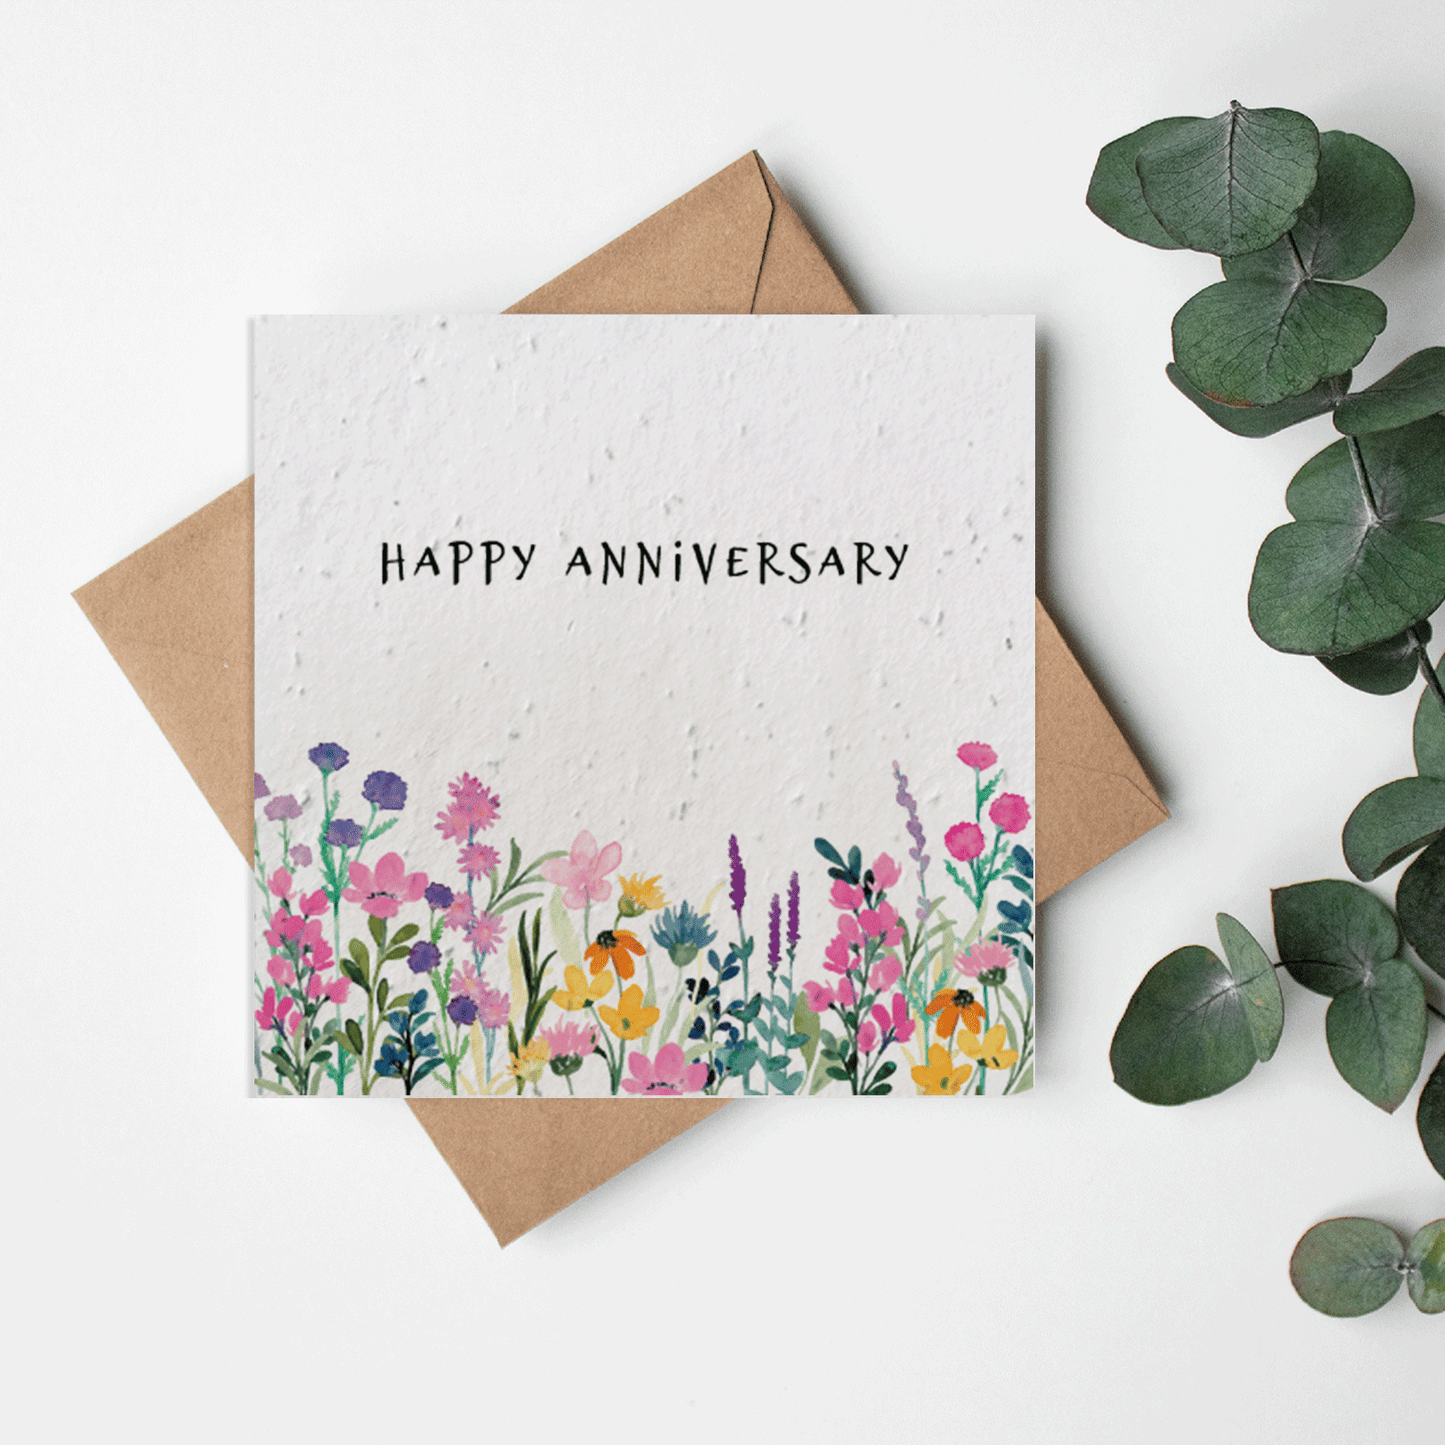 Summertime Meadow - Happy Anniversary